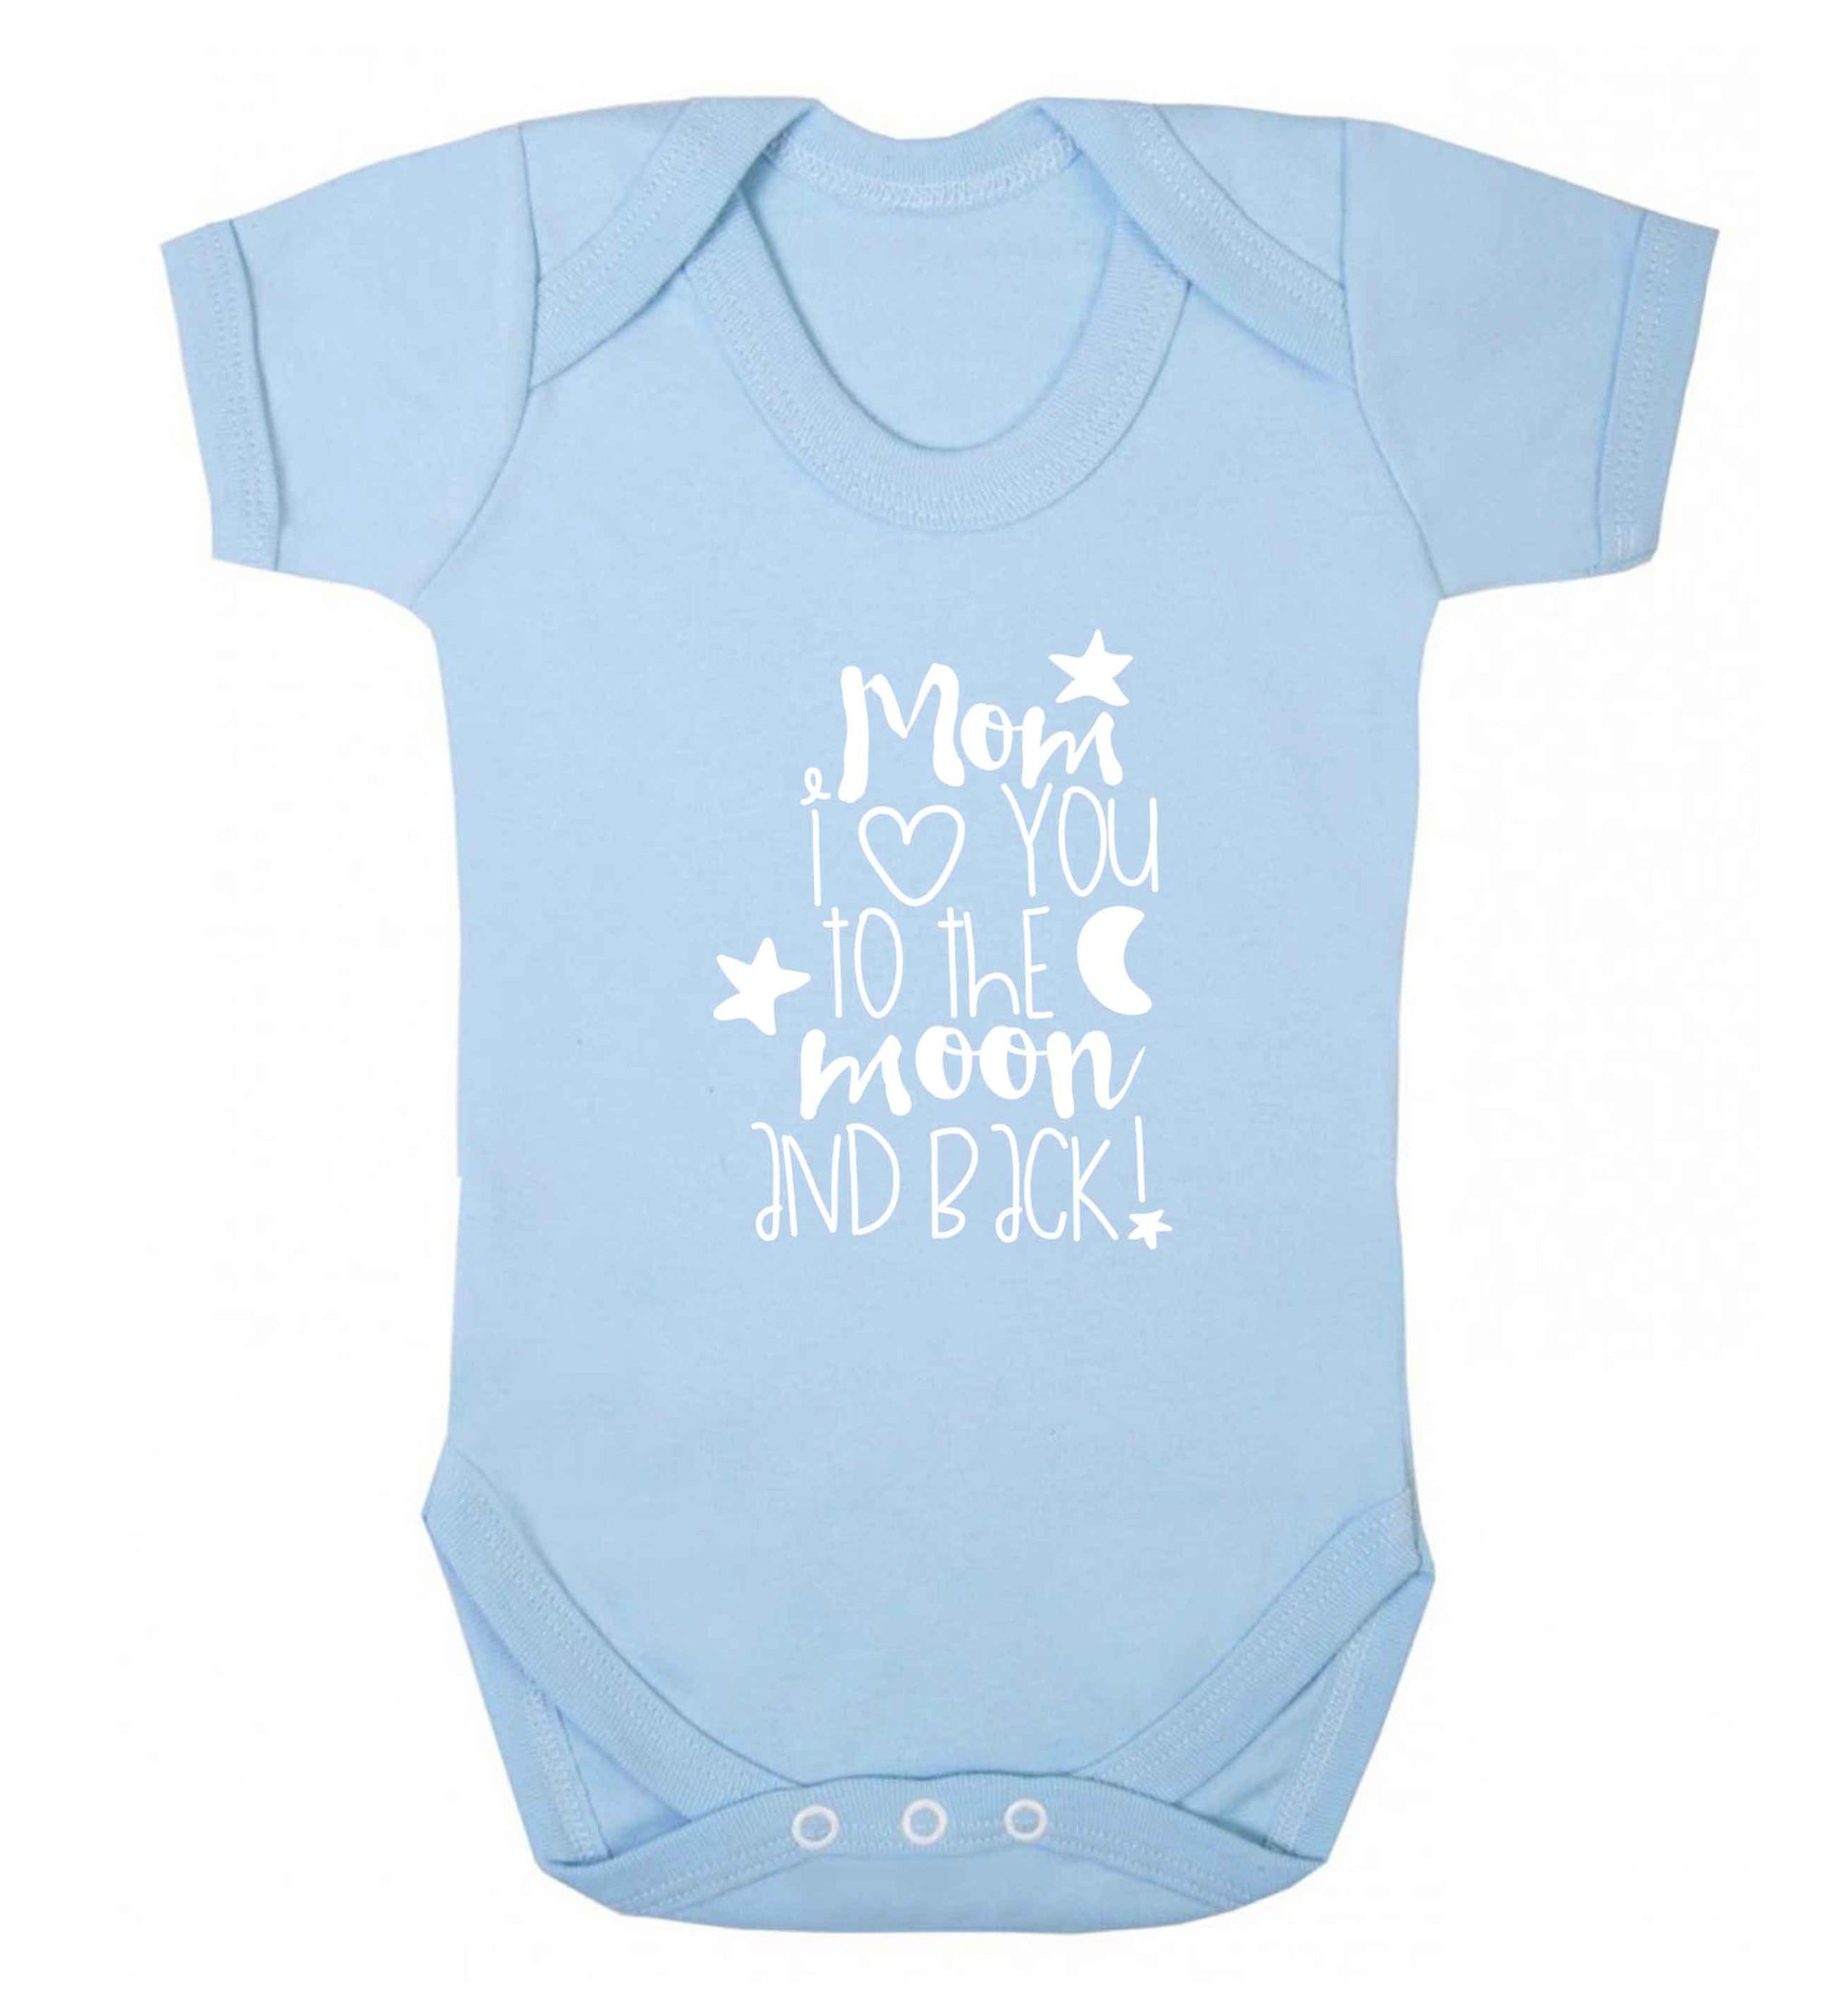 Mom I love you to the moon and back baby vest pale blue 18-24 months